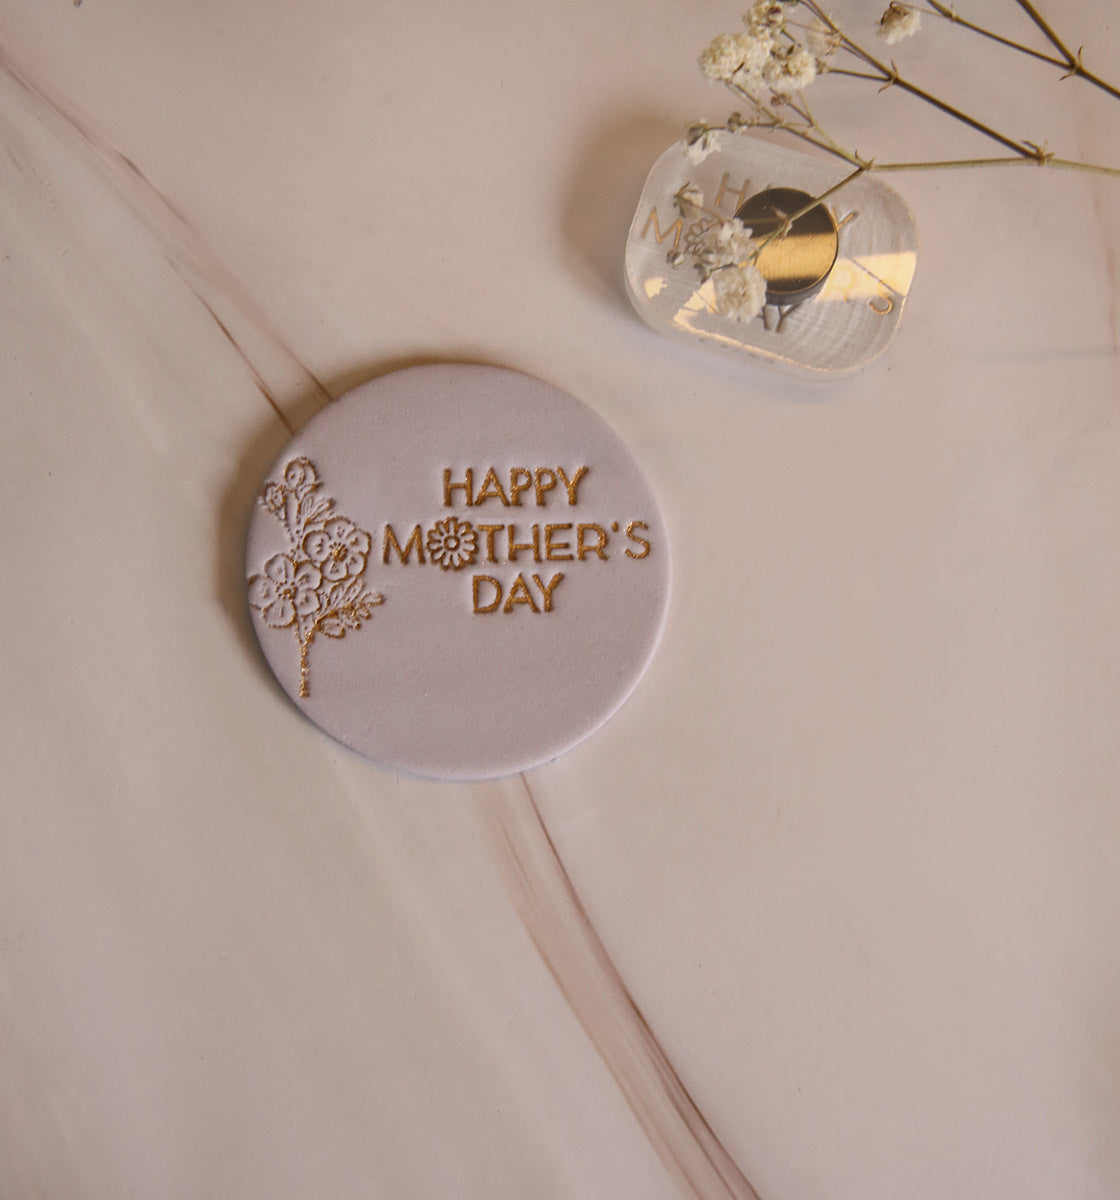 Happy Mother's Day Daisy - Mini impression stamp